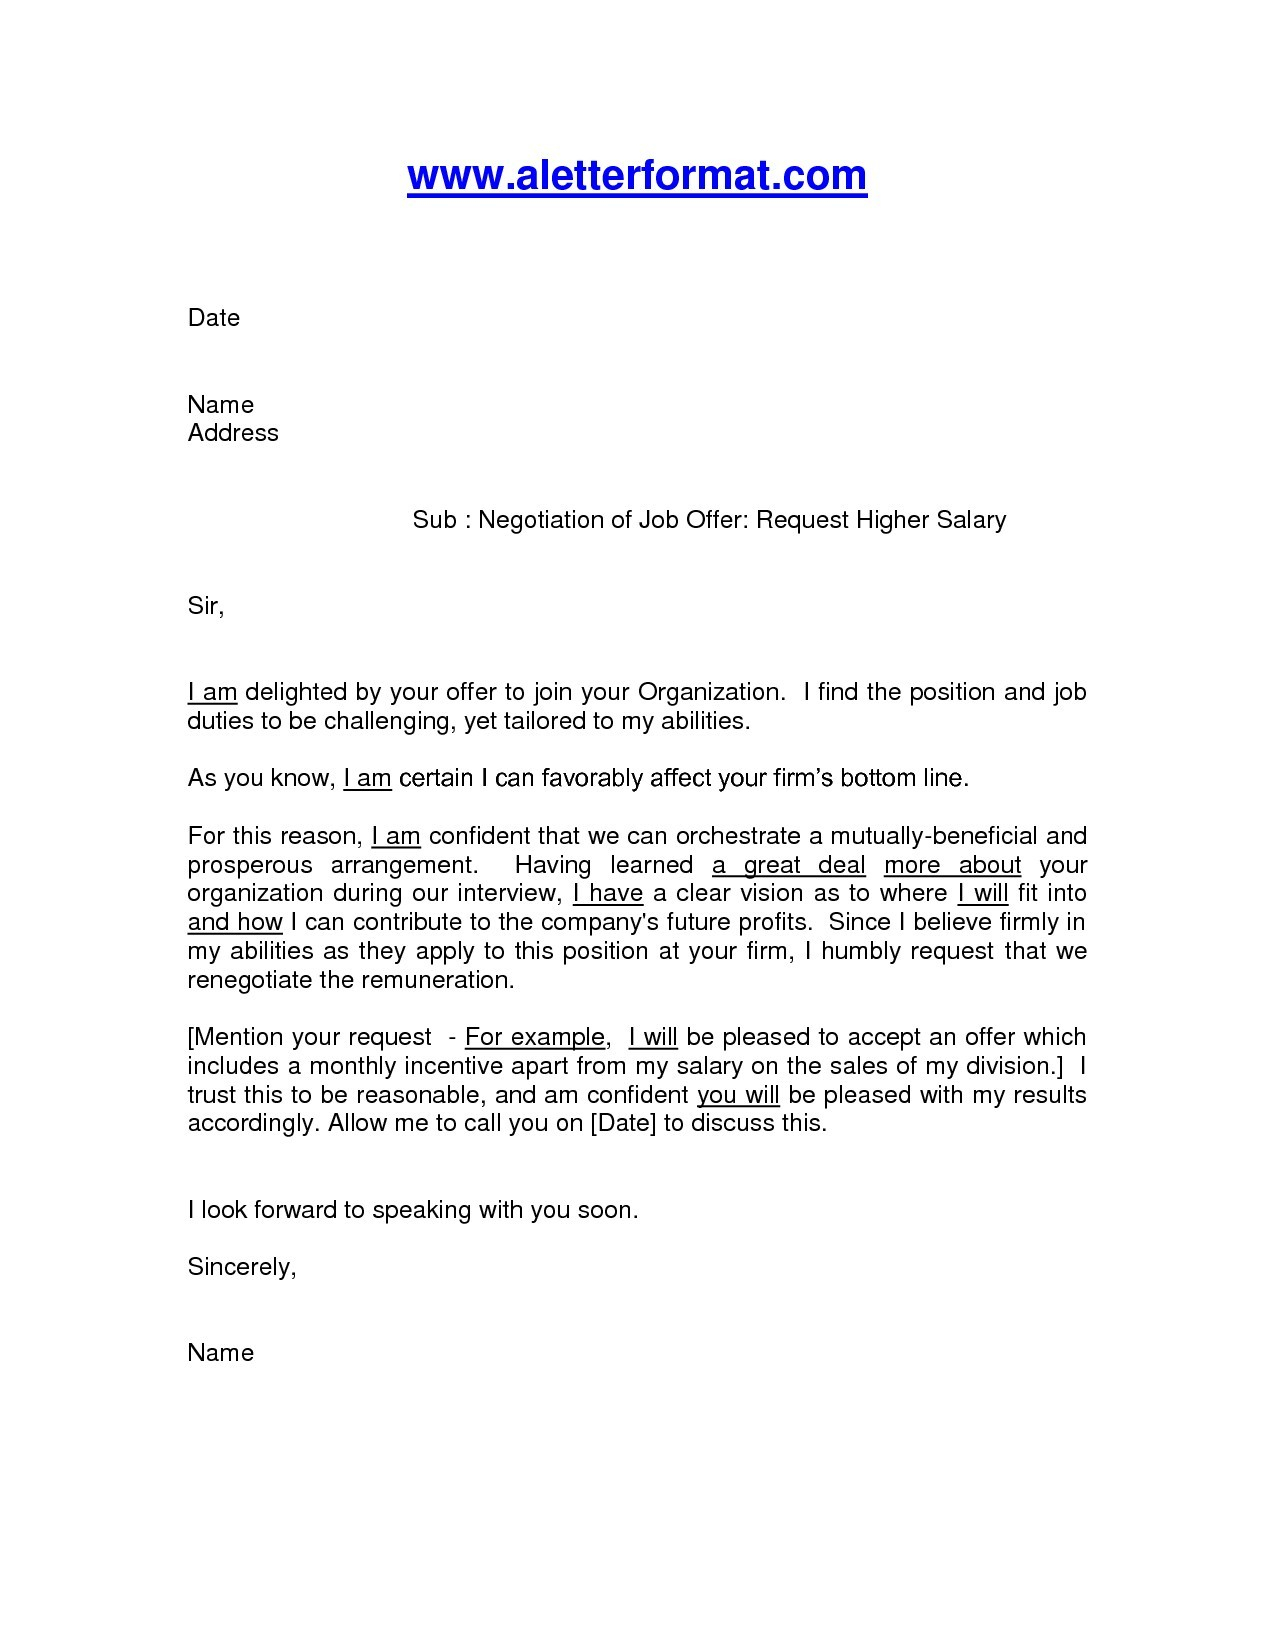 Counter Offer Letter Template - Salary Negotiation Email Template